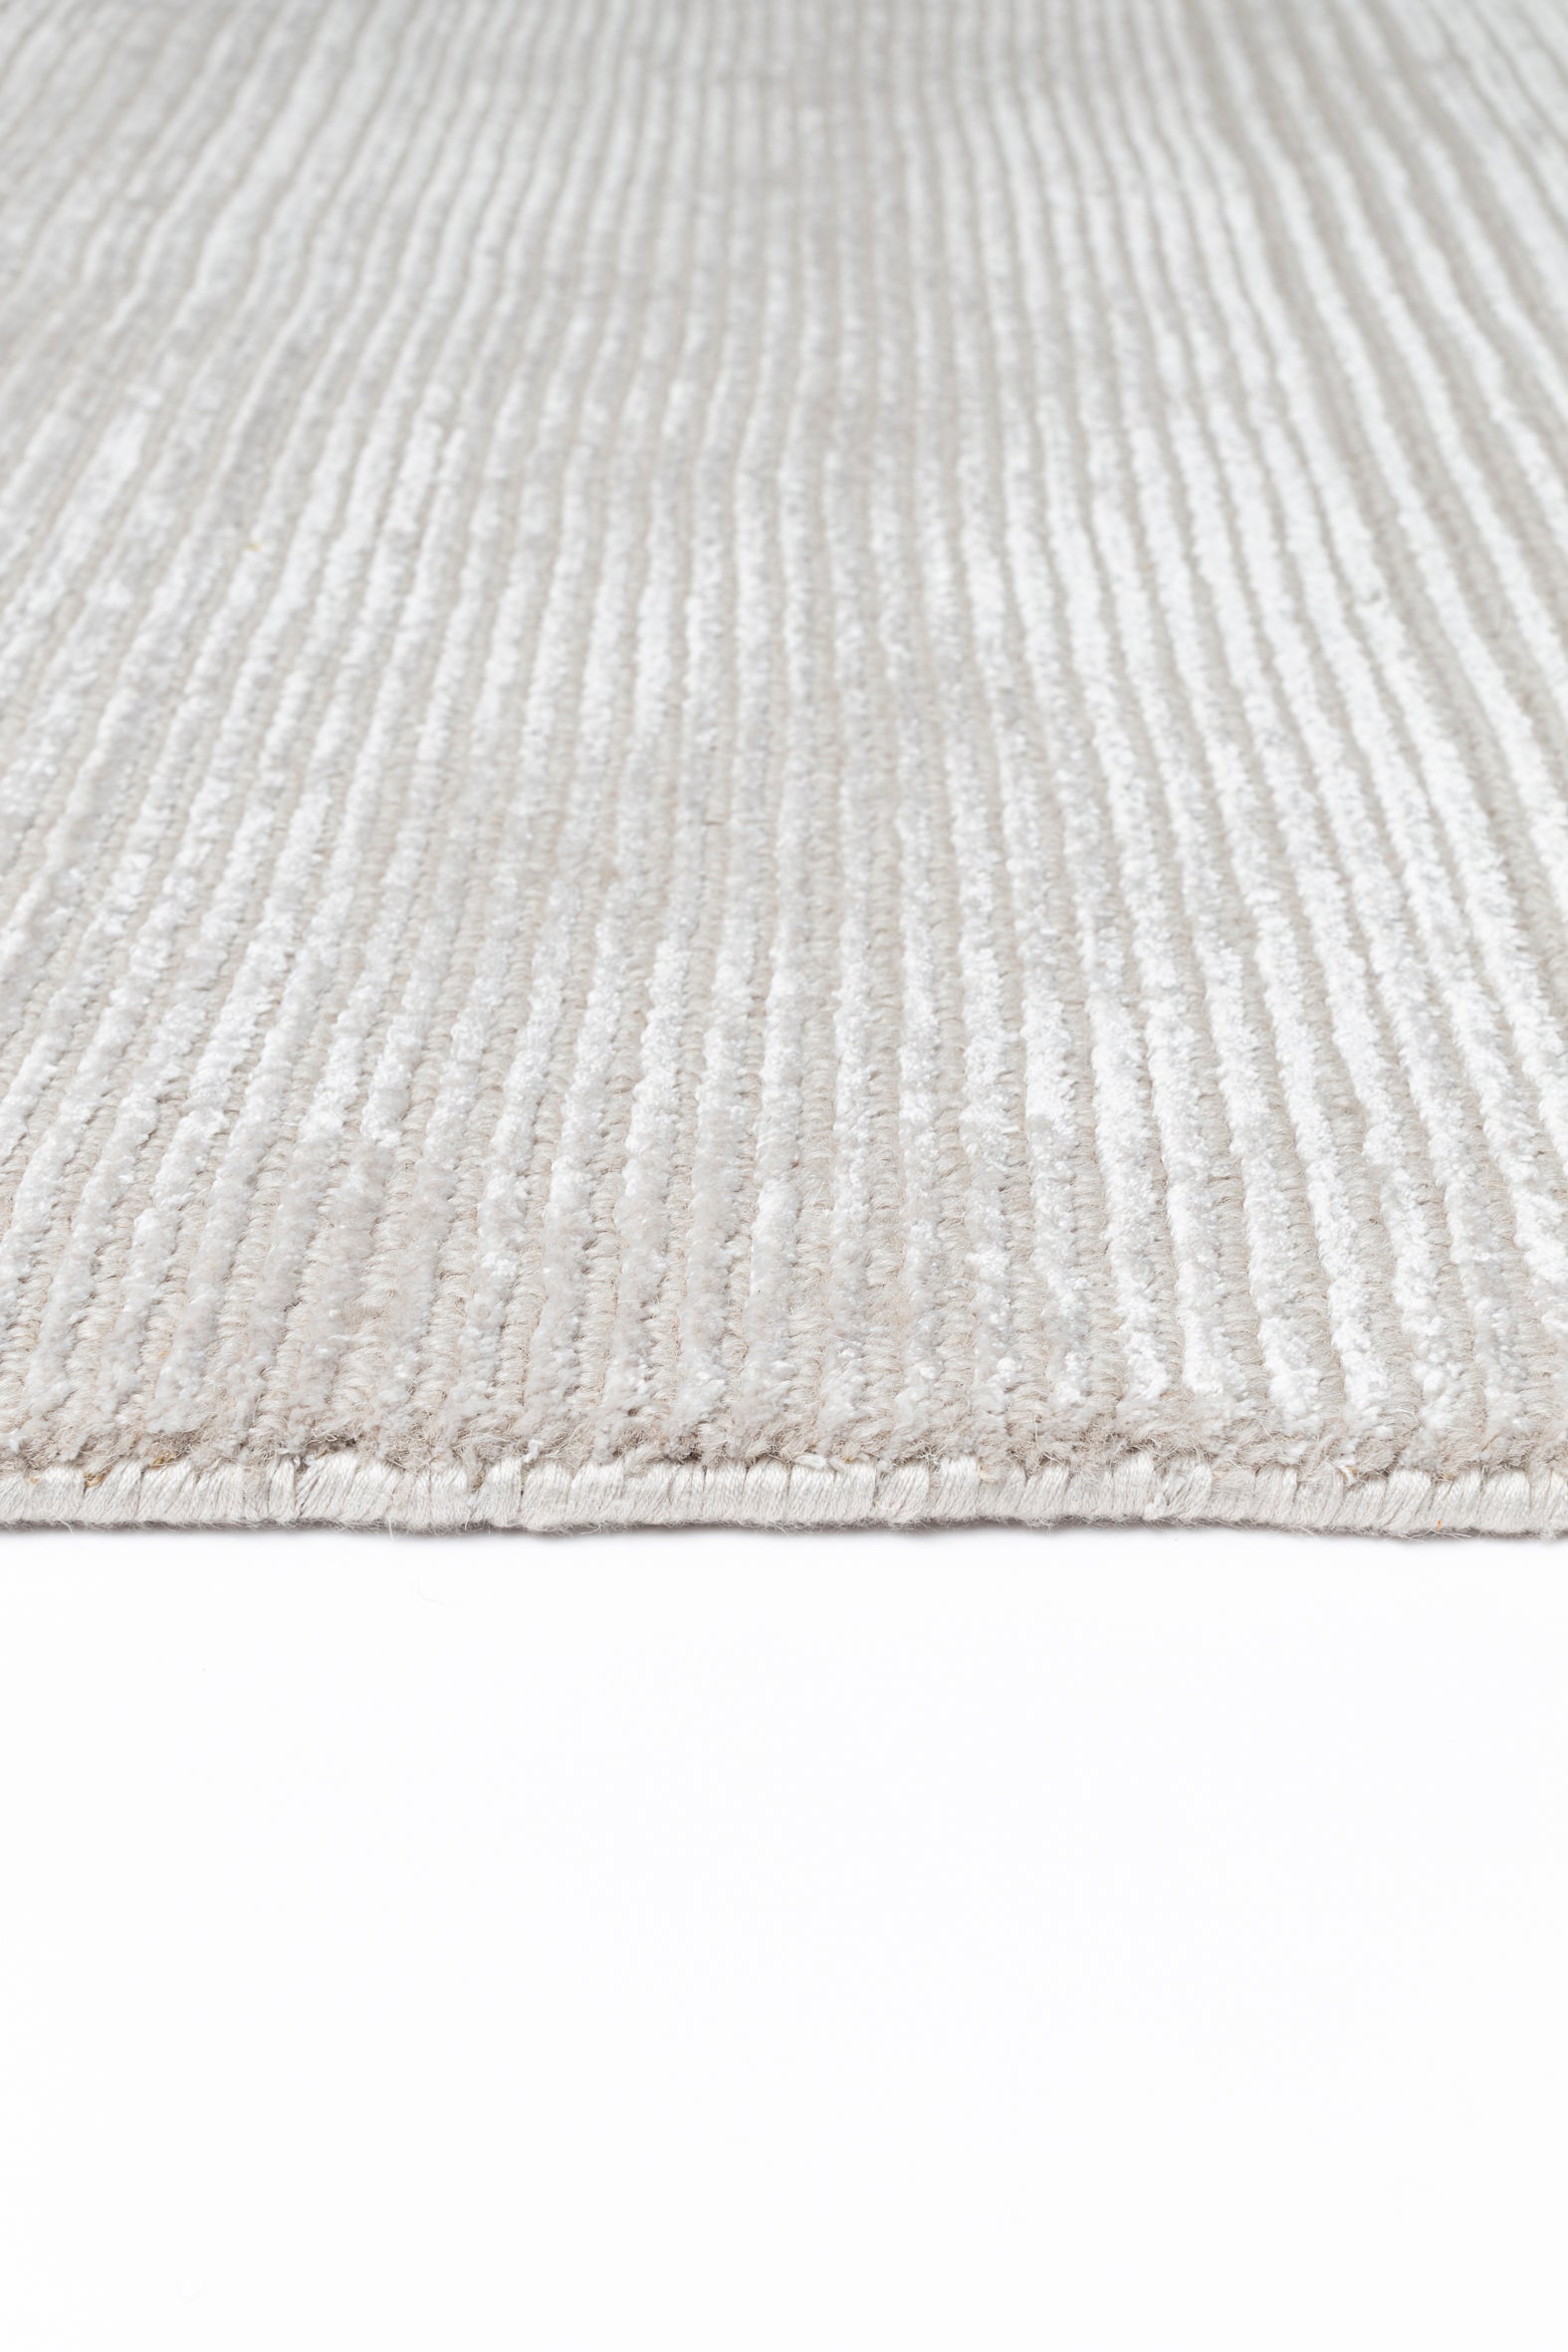 Ligne Pure Ray 252.001.900 Rug